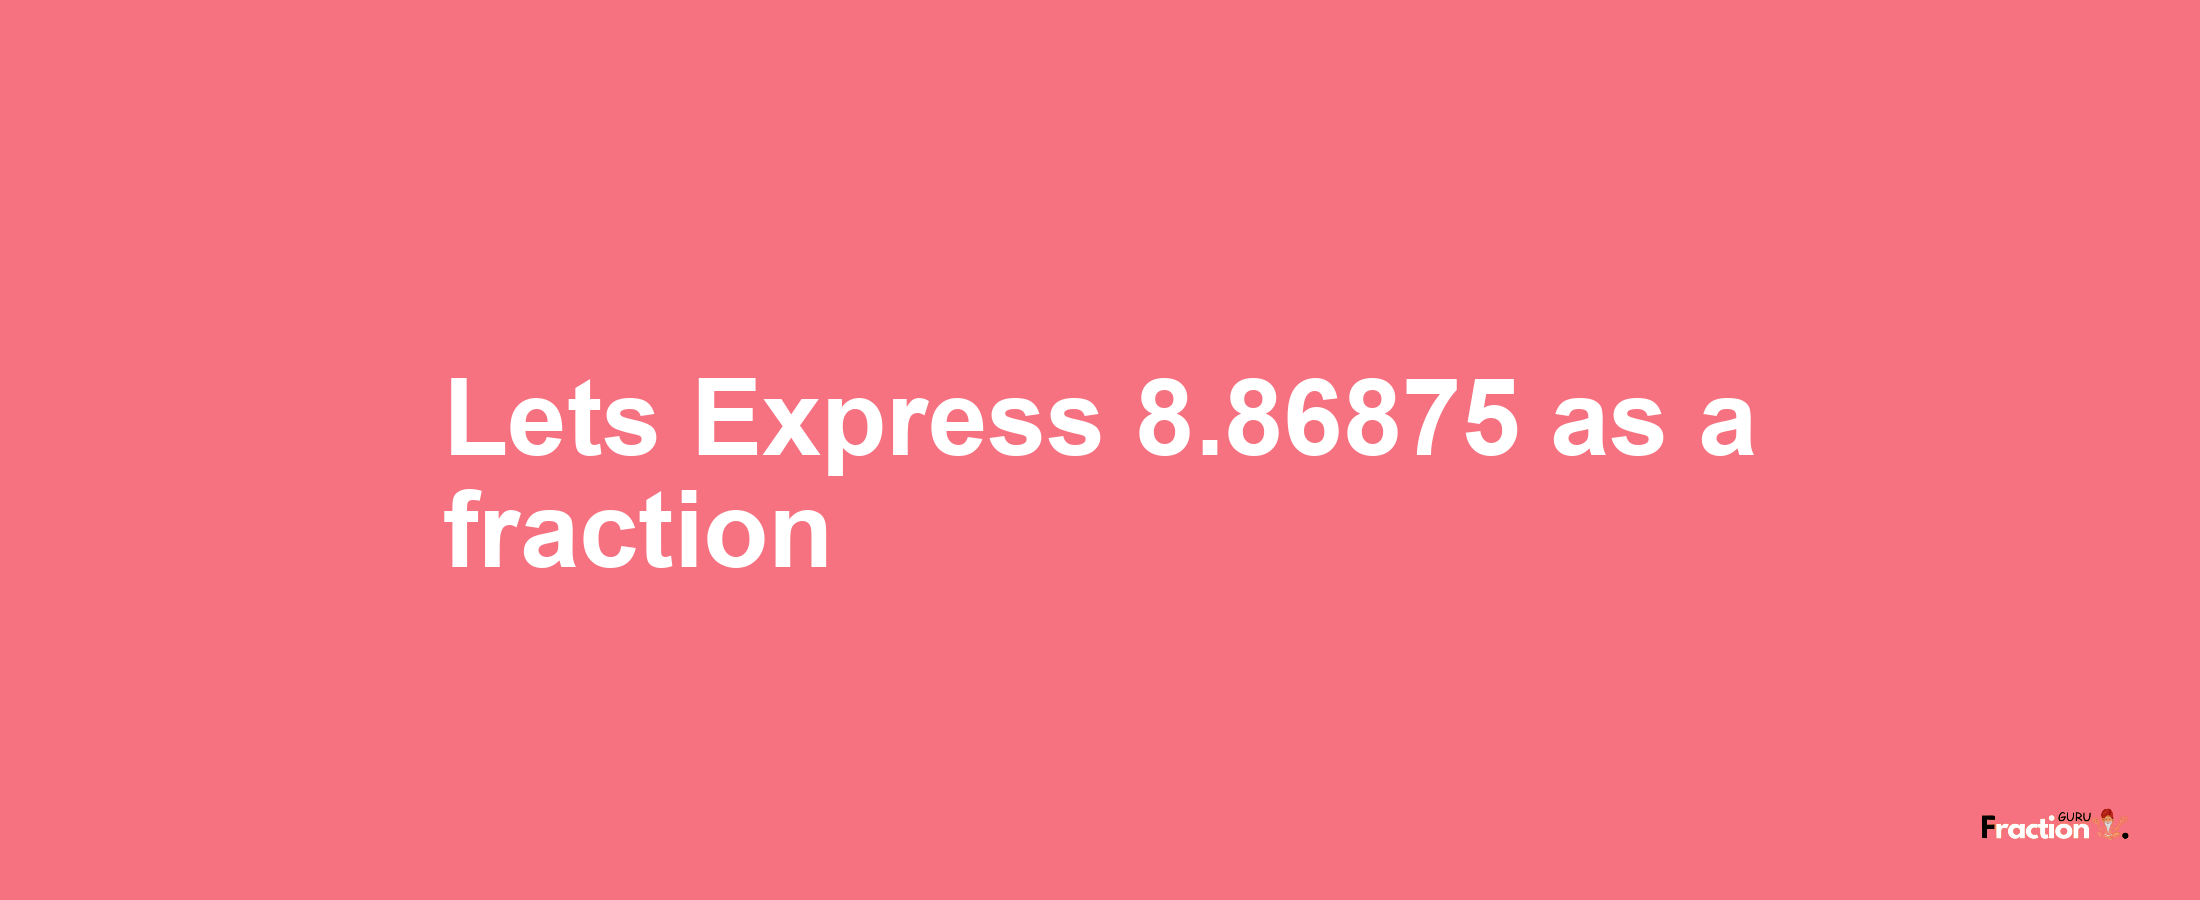 Lets Express 8.86875 as afraction